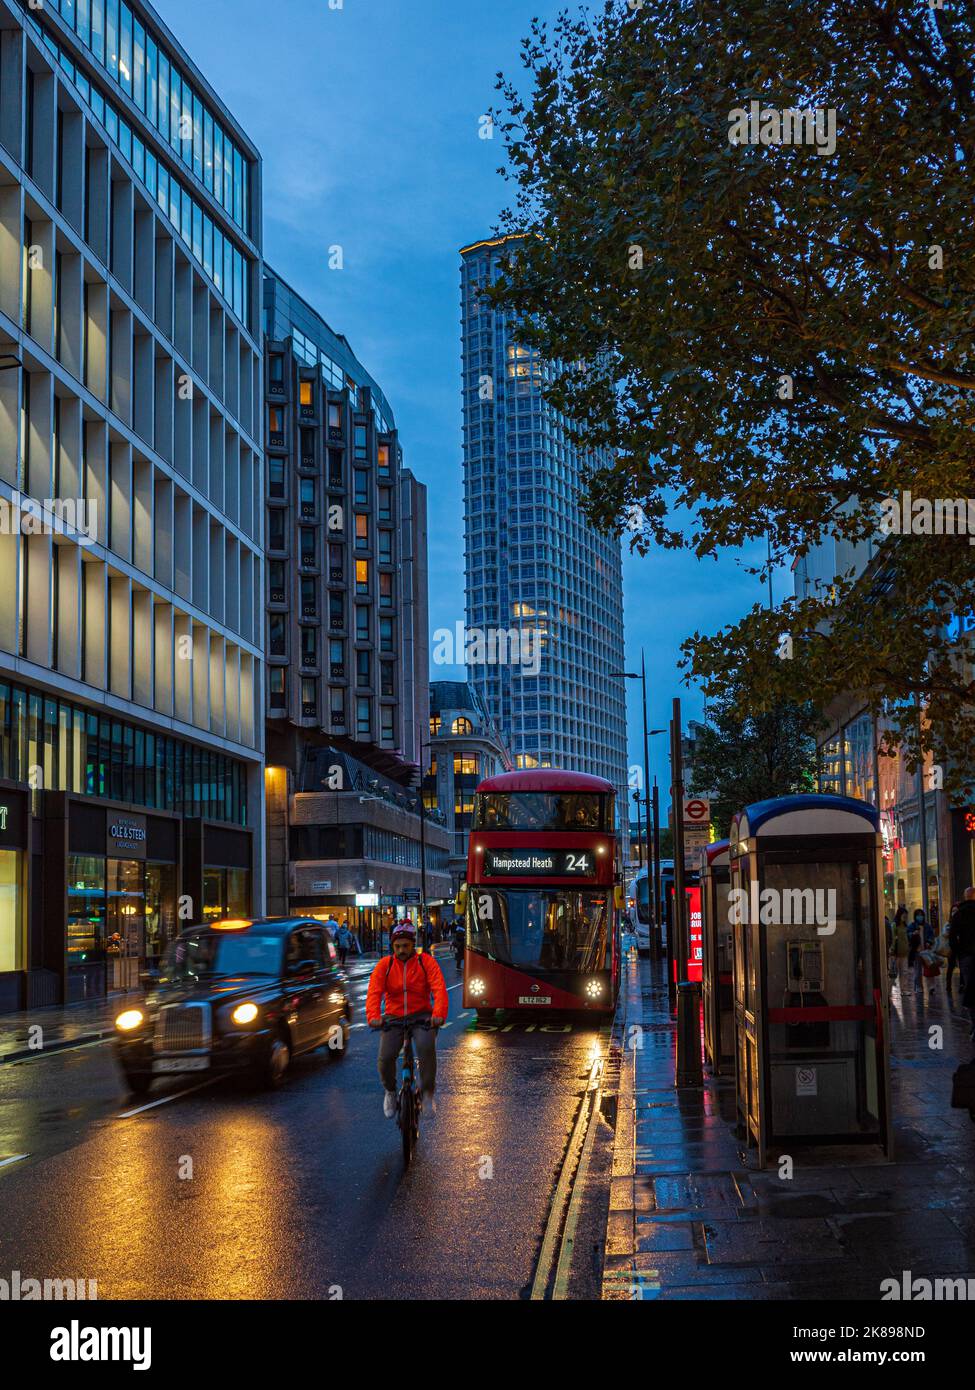 Tottenham Court Road London - evening commuter traffic on Tottenham Court Rd in central London, Euston tower in the background. Stock Photo